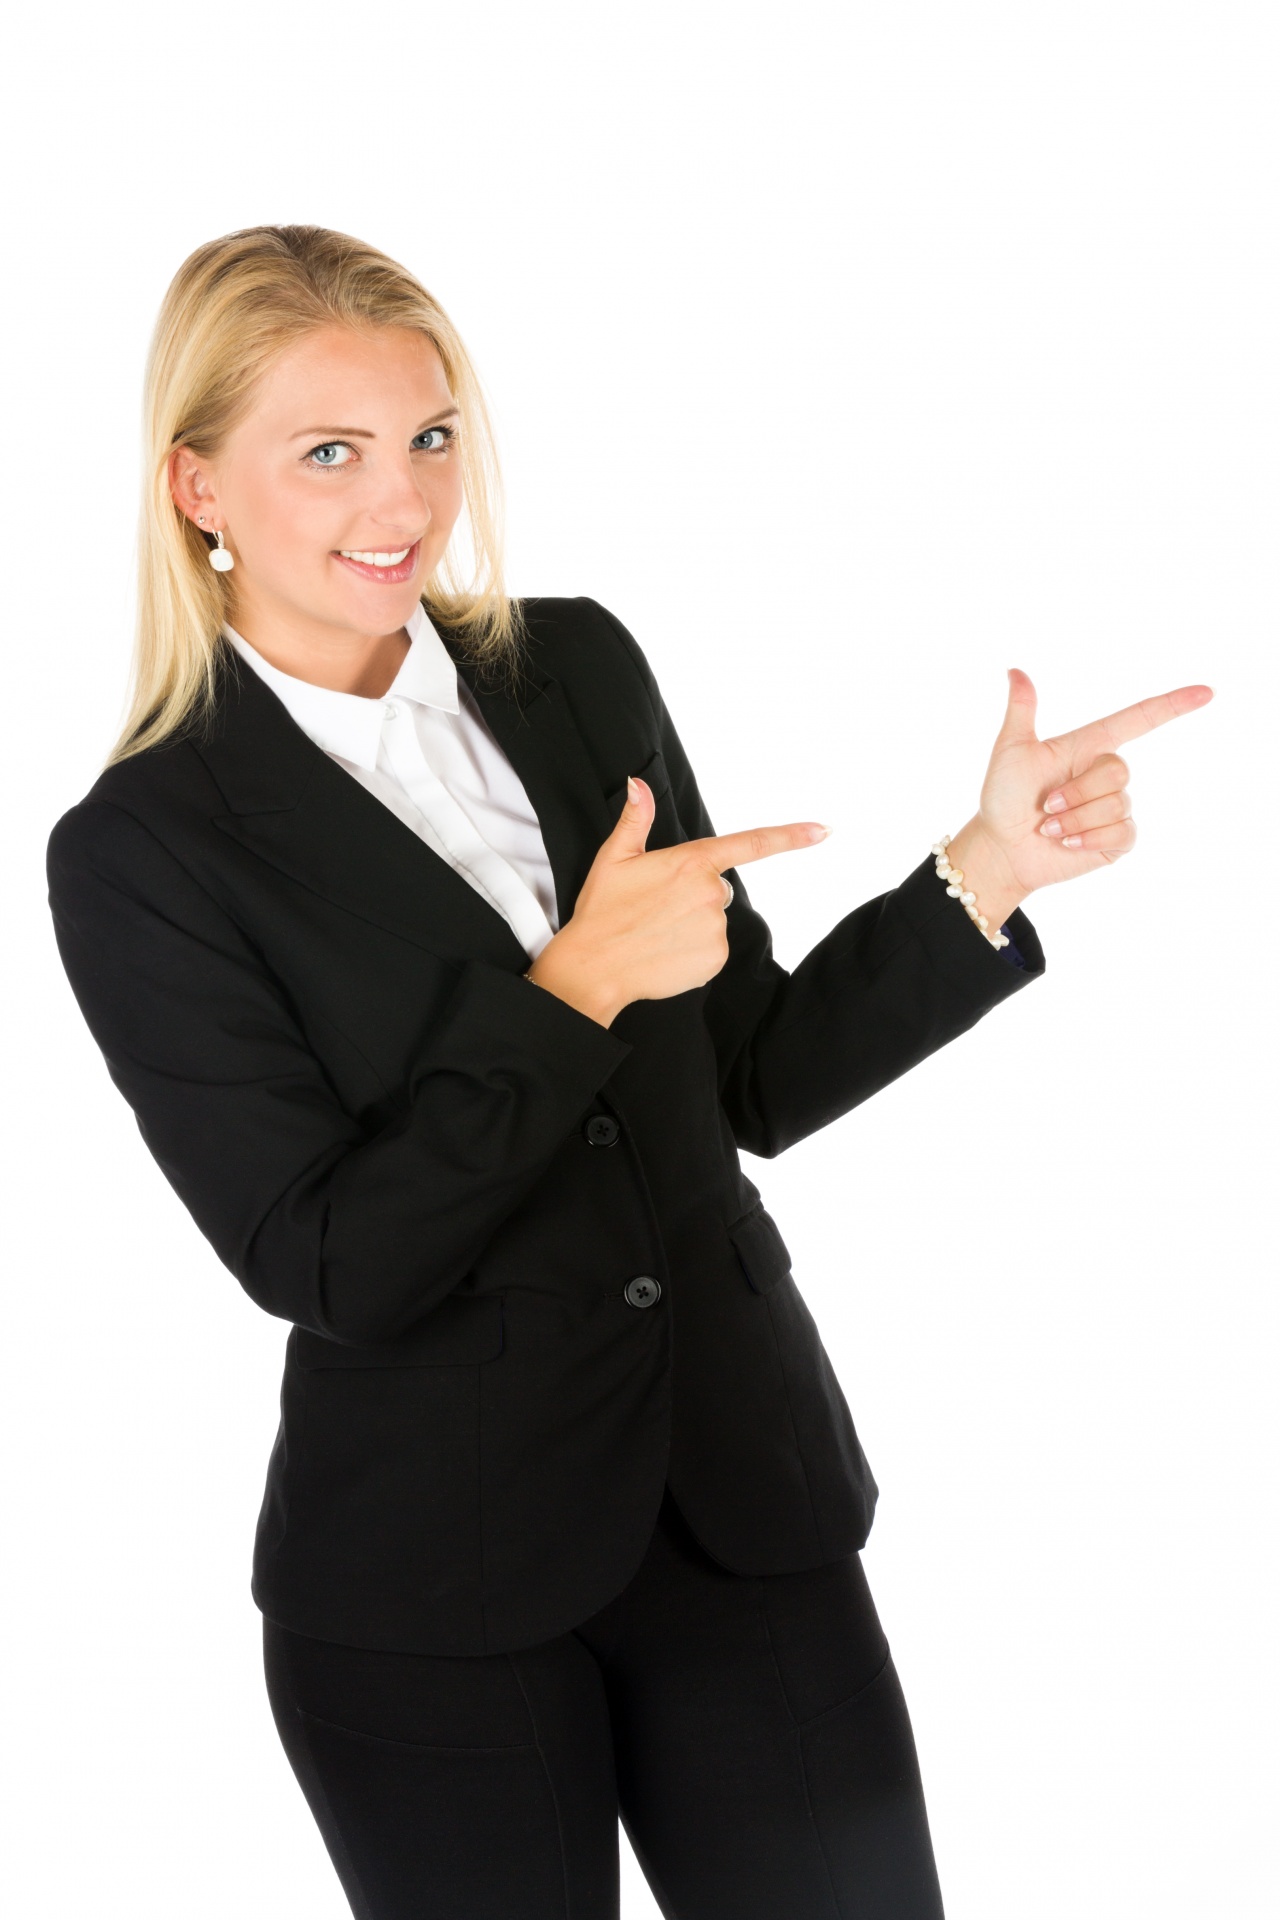 https://www.publicdomainpictures.net/pictures/190000/velka/business-woman-pointing-1470490477O2v.jpg